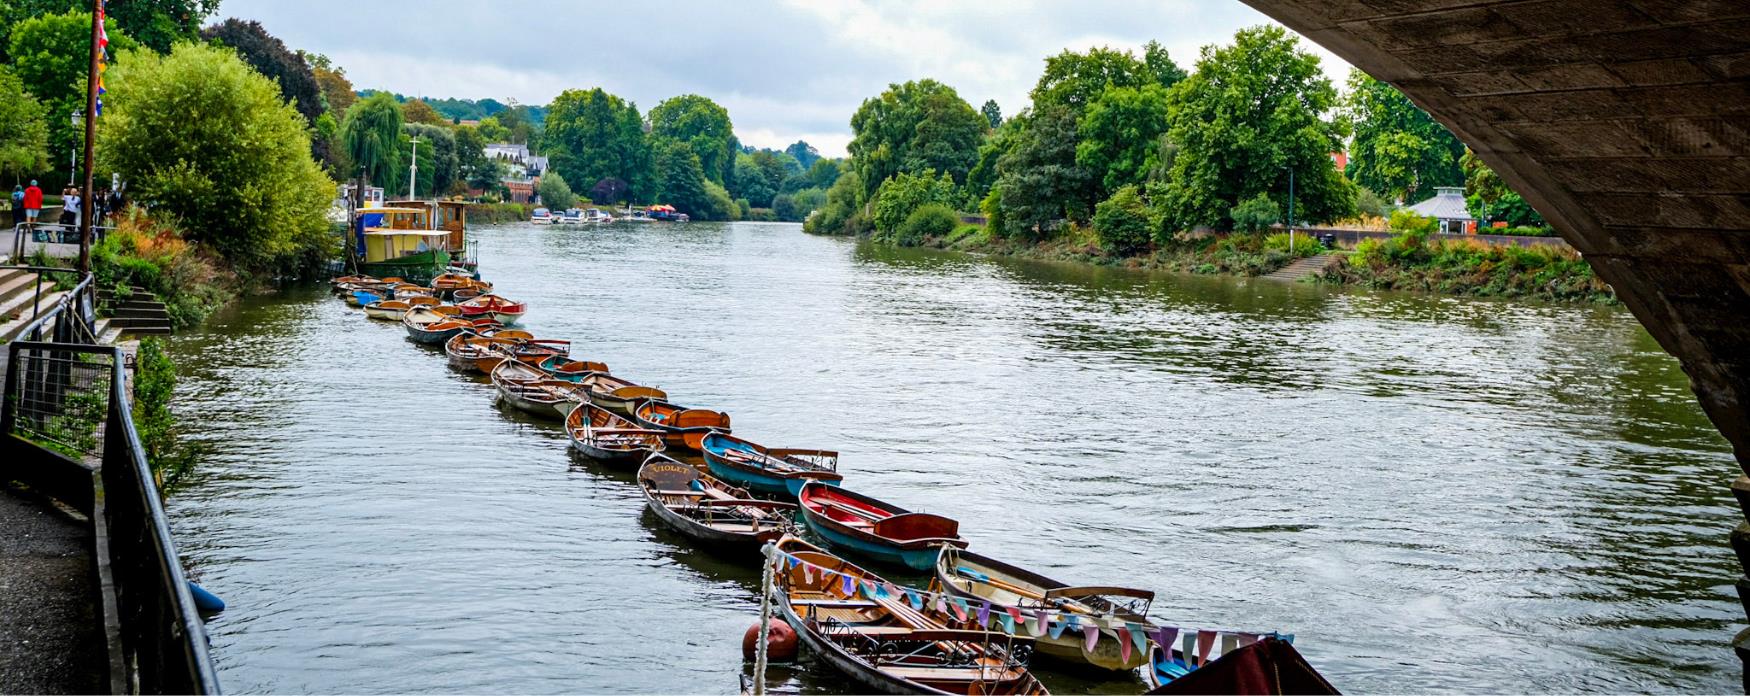 An image of Richmond riverside with boats lined up